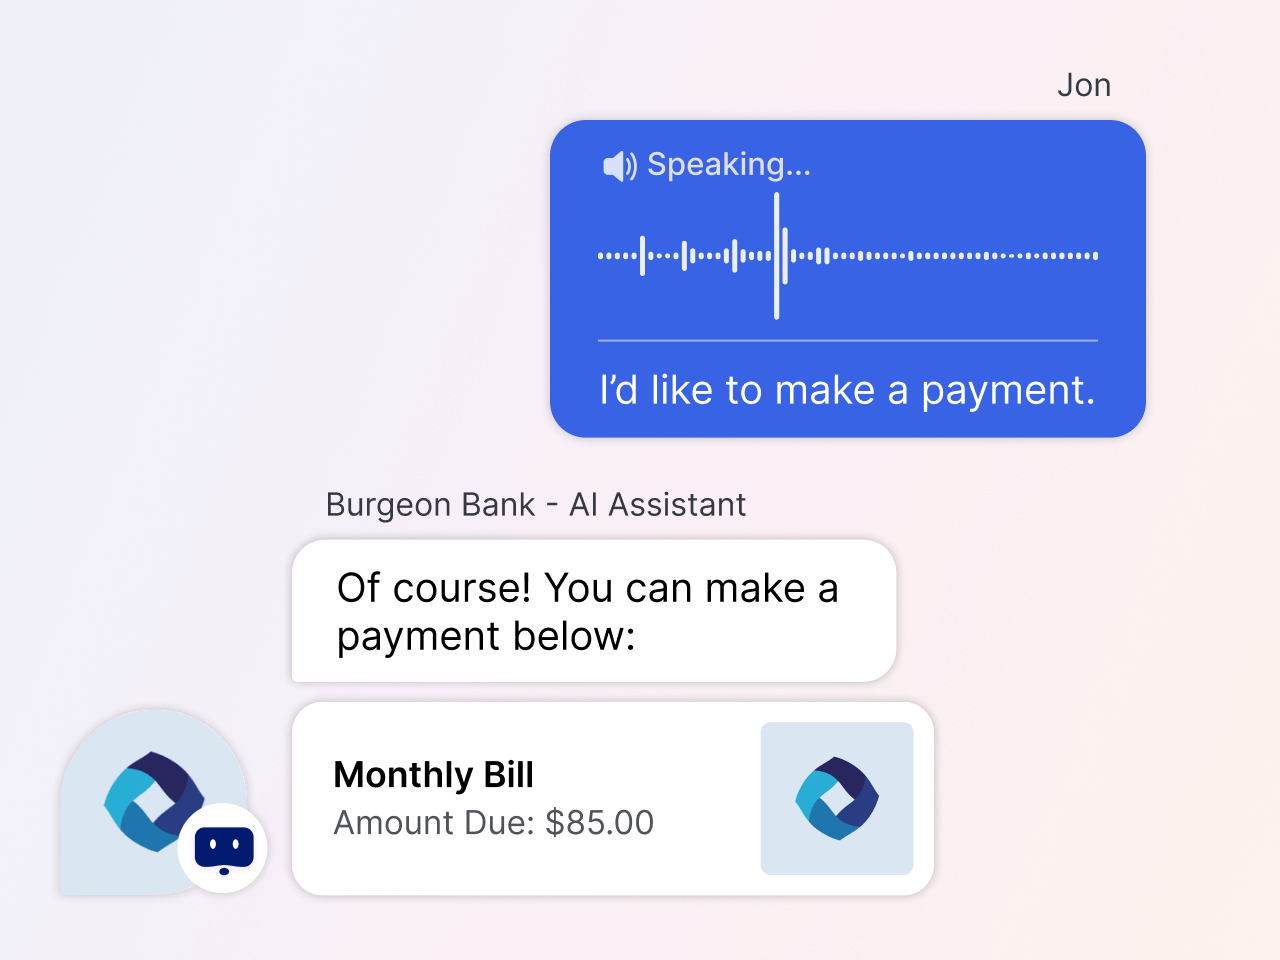 voice bots recognizing spoken request and responding with payment instructions, helping earn more satisfied customers